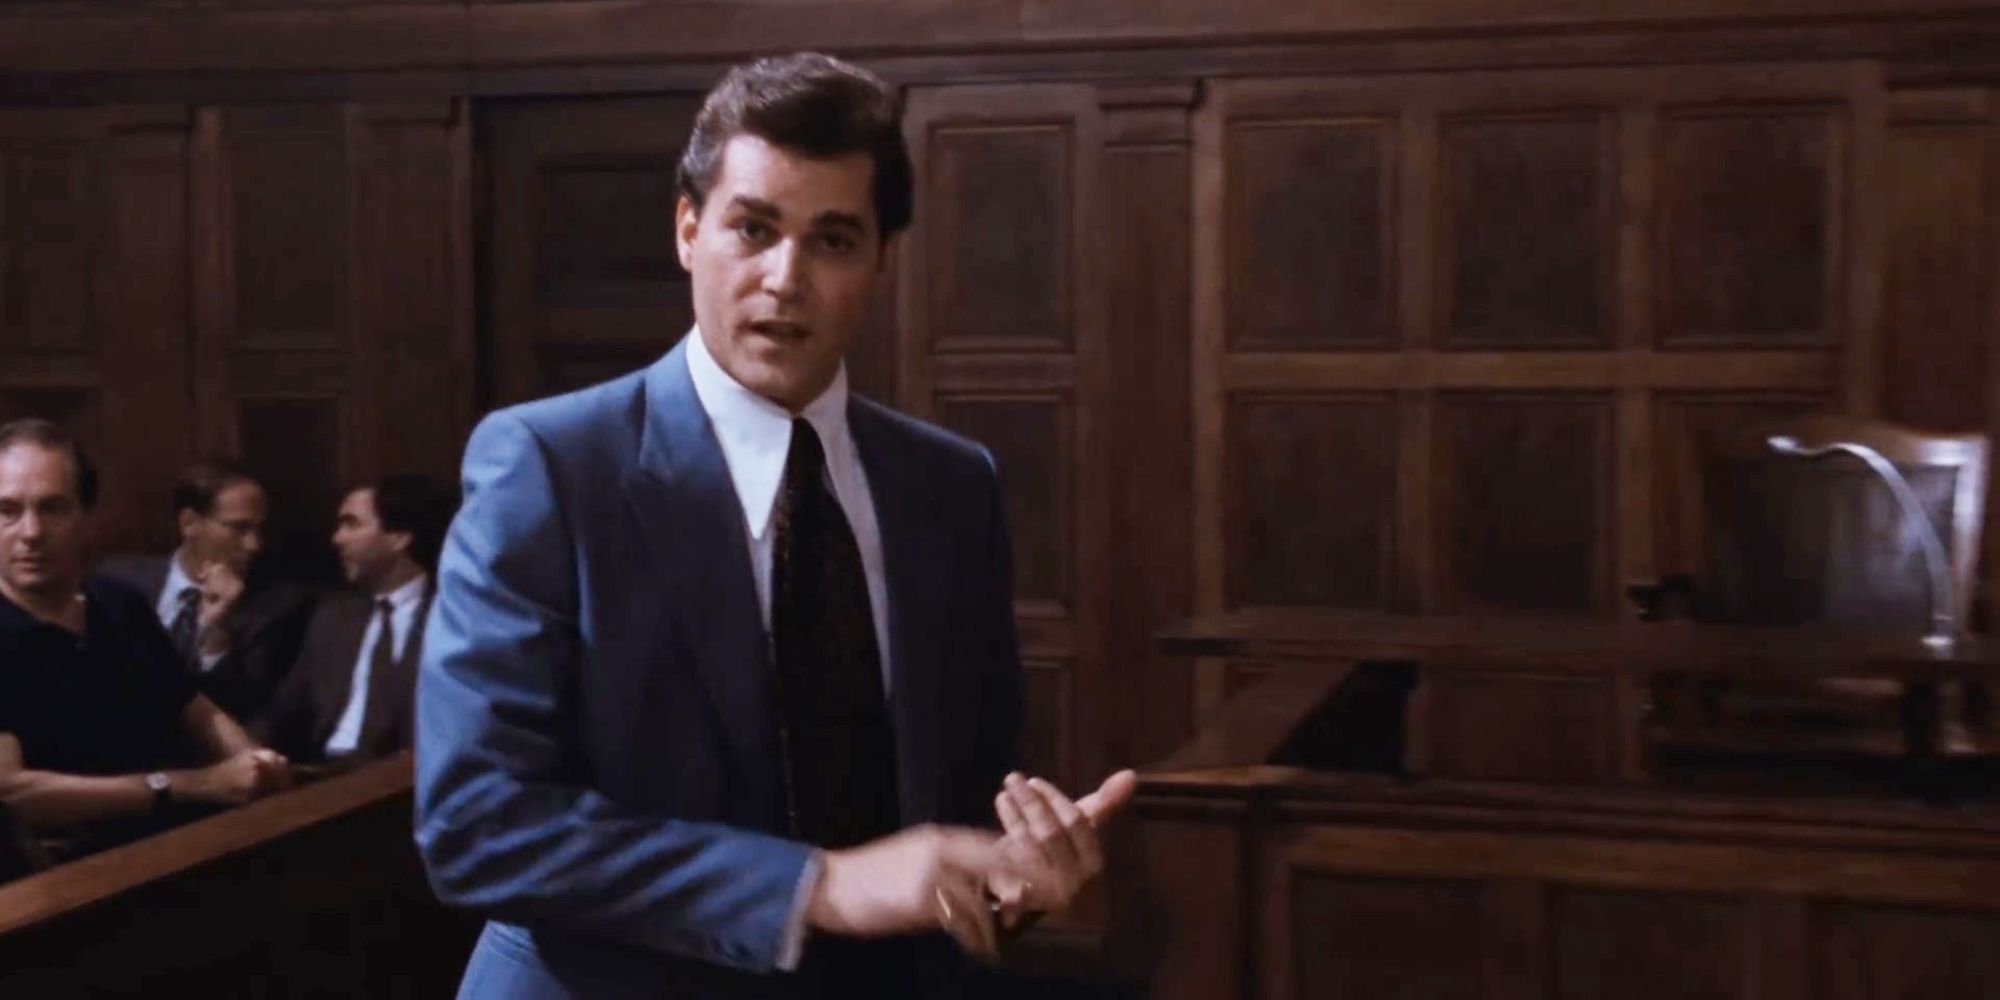 Henry Hill as narrator